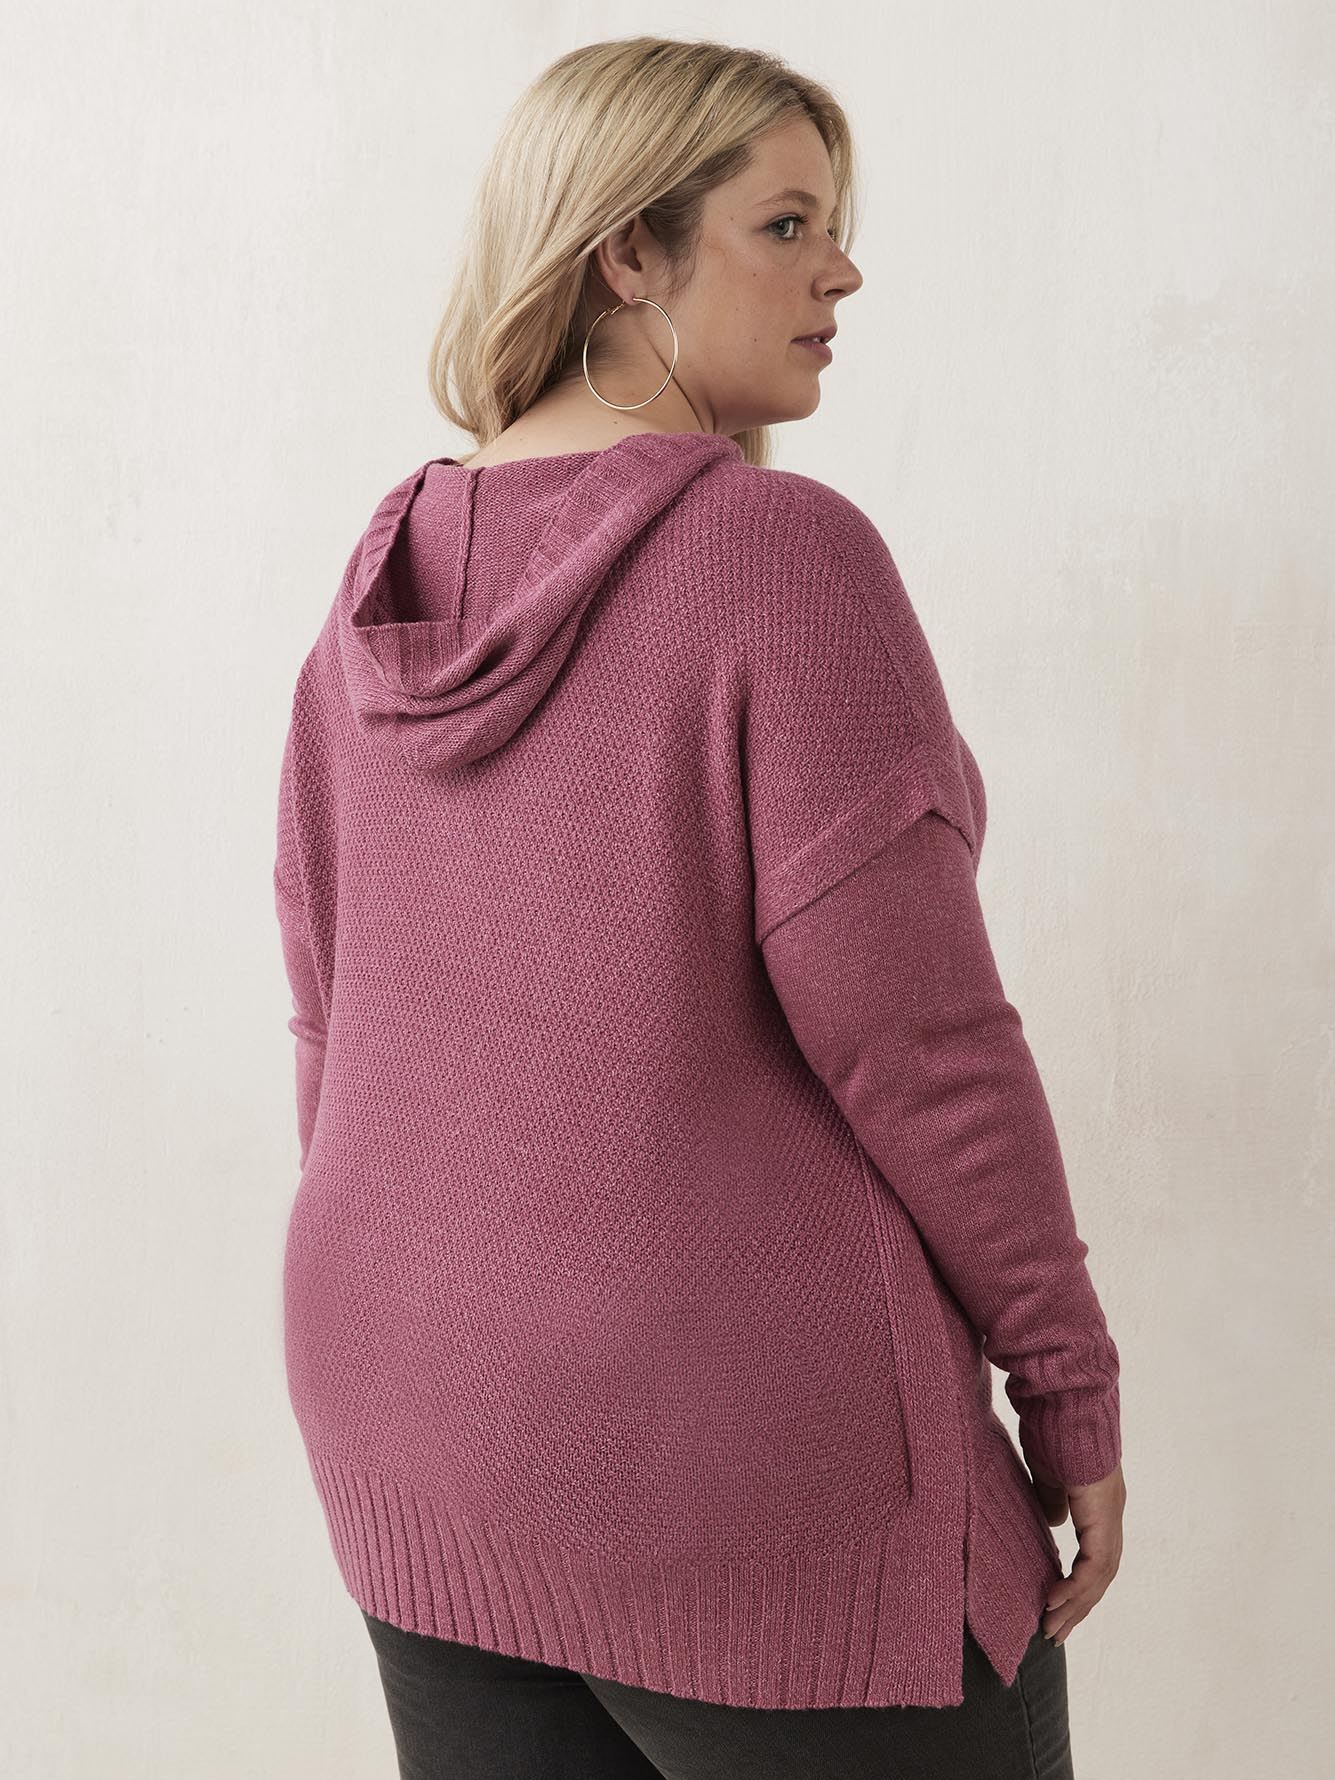 Hooded Poncho Sweater with Cable Stitches